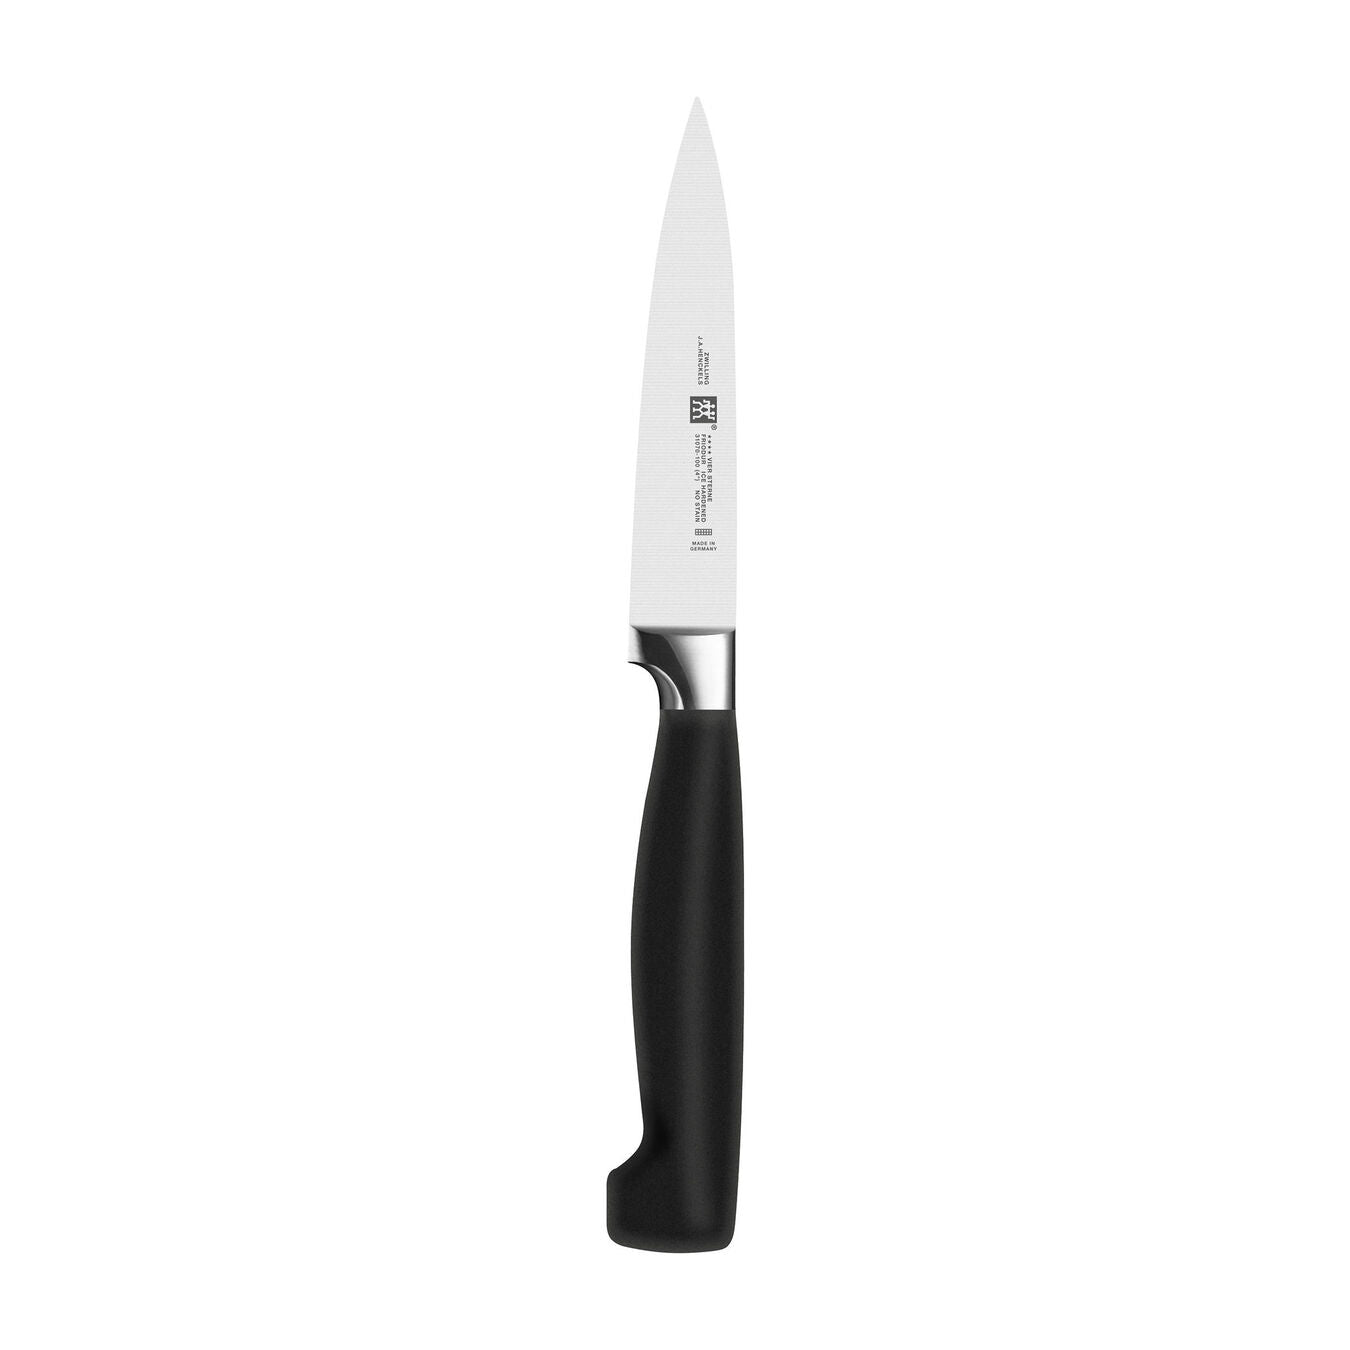 kitchen knife with black handle on white background